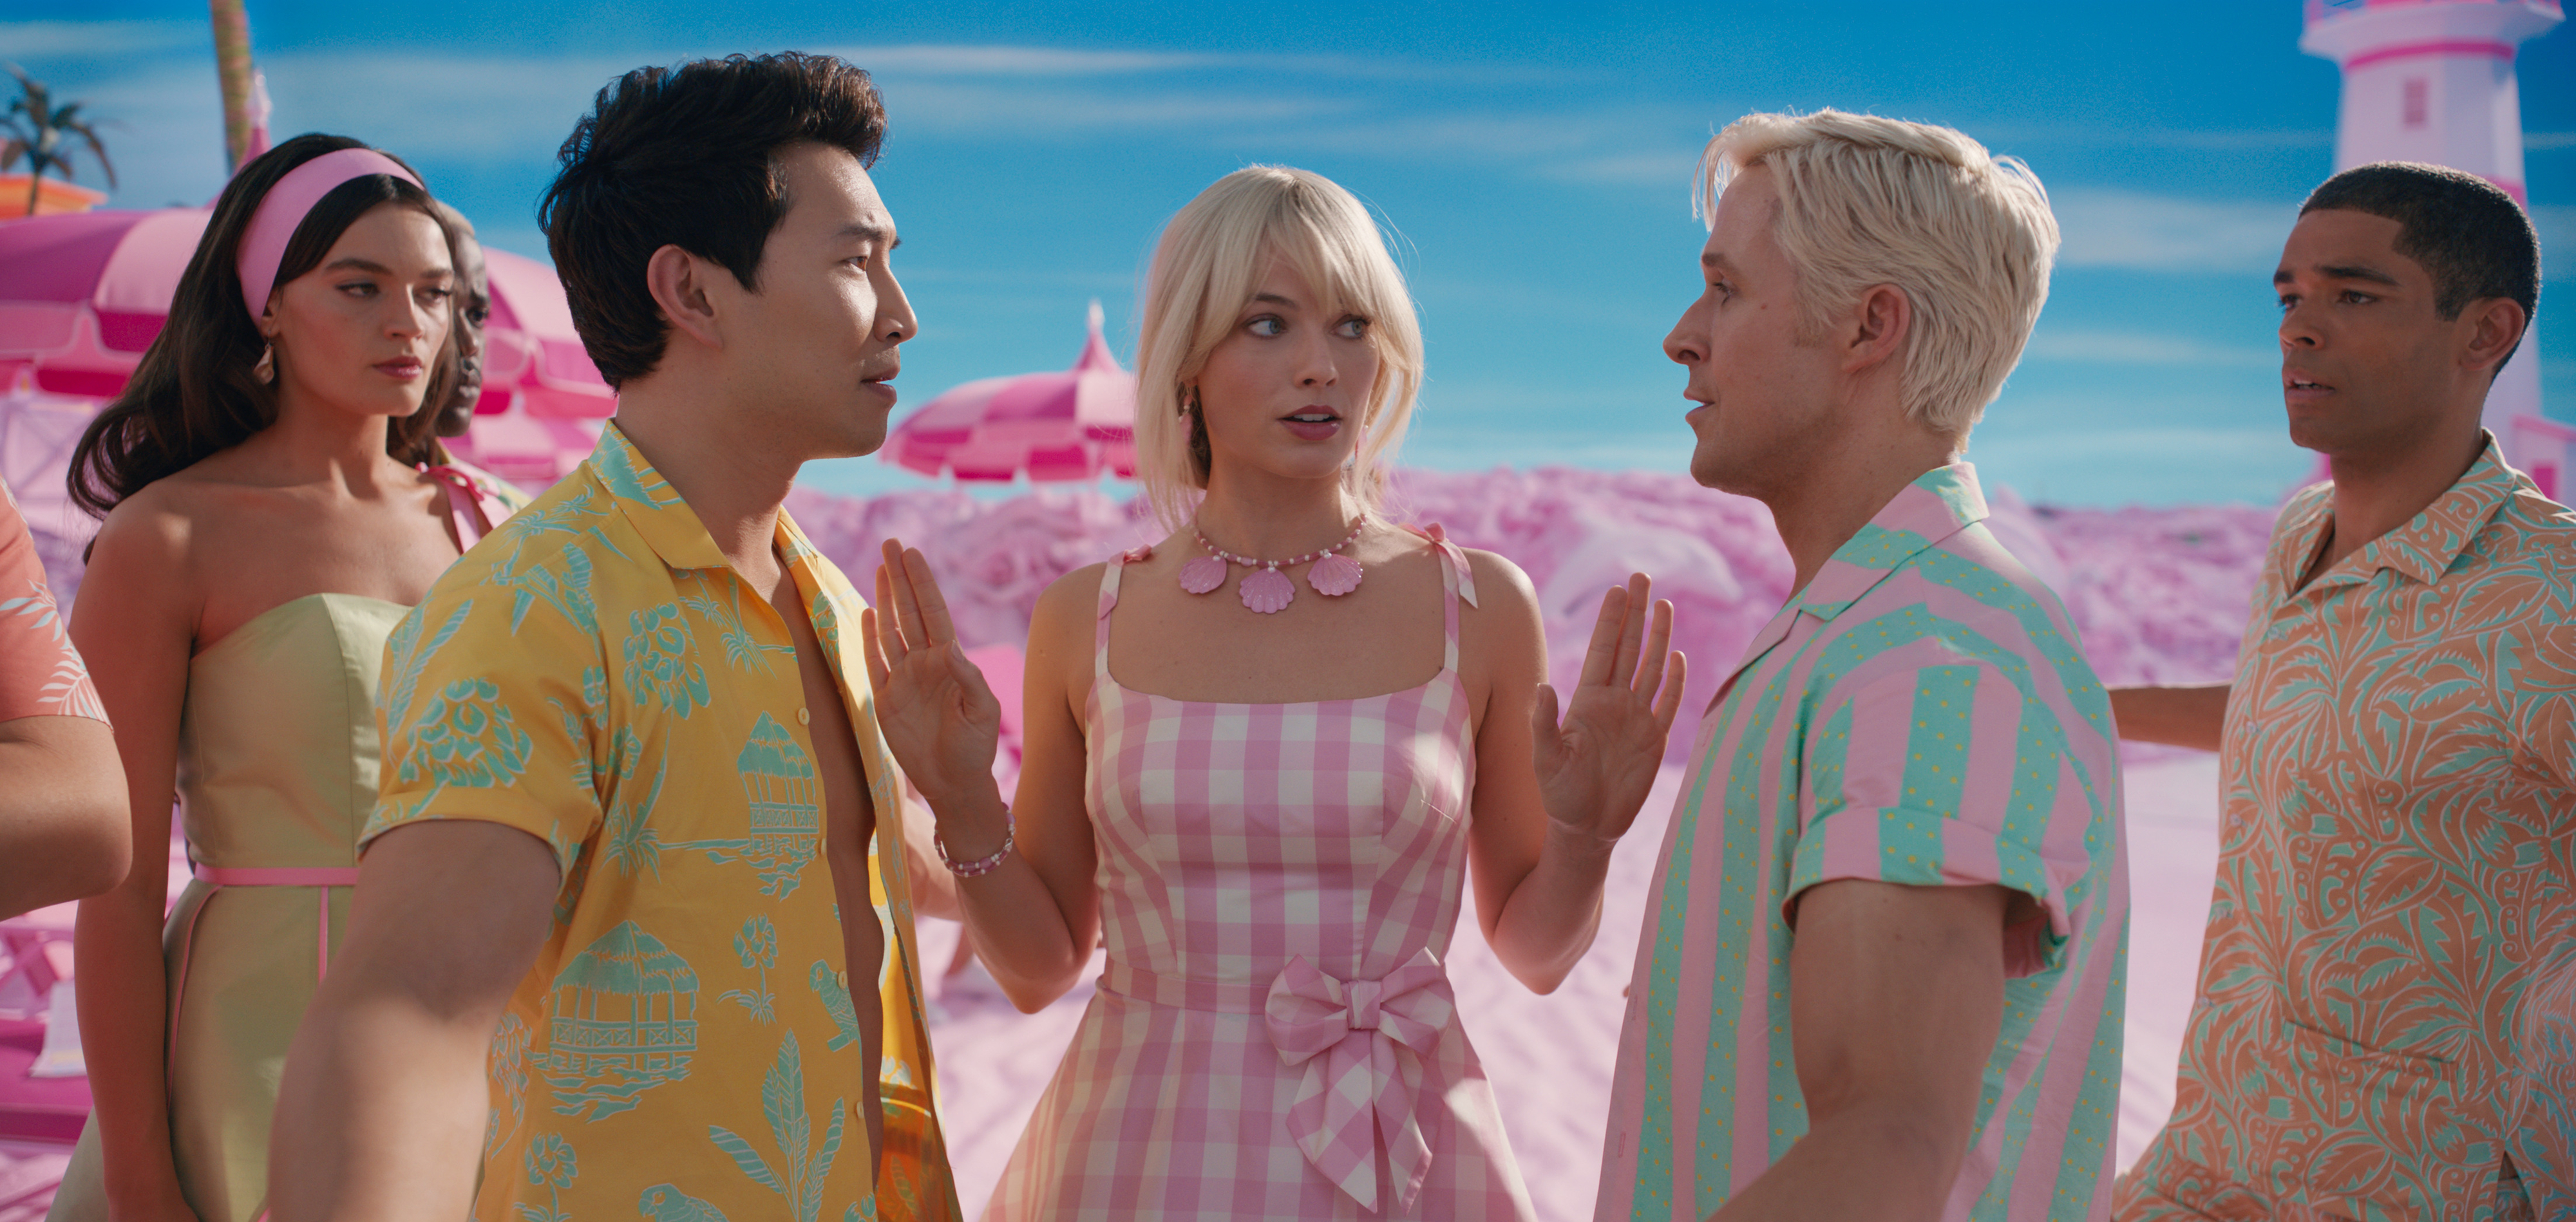 Cast members in a scene at the pink beach